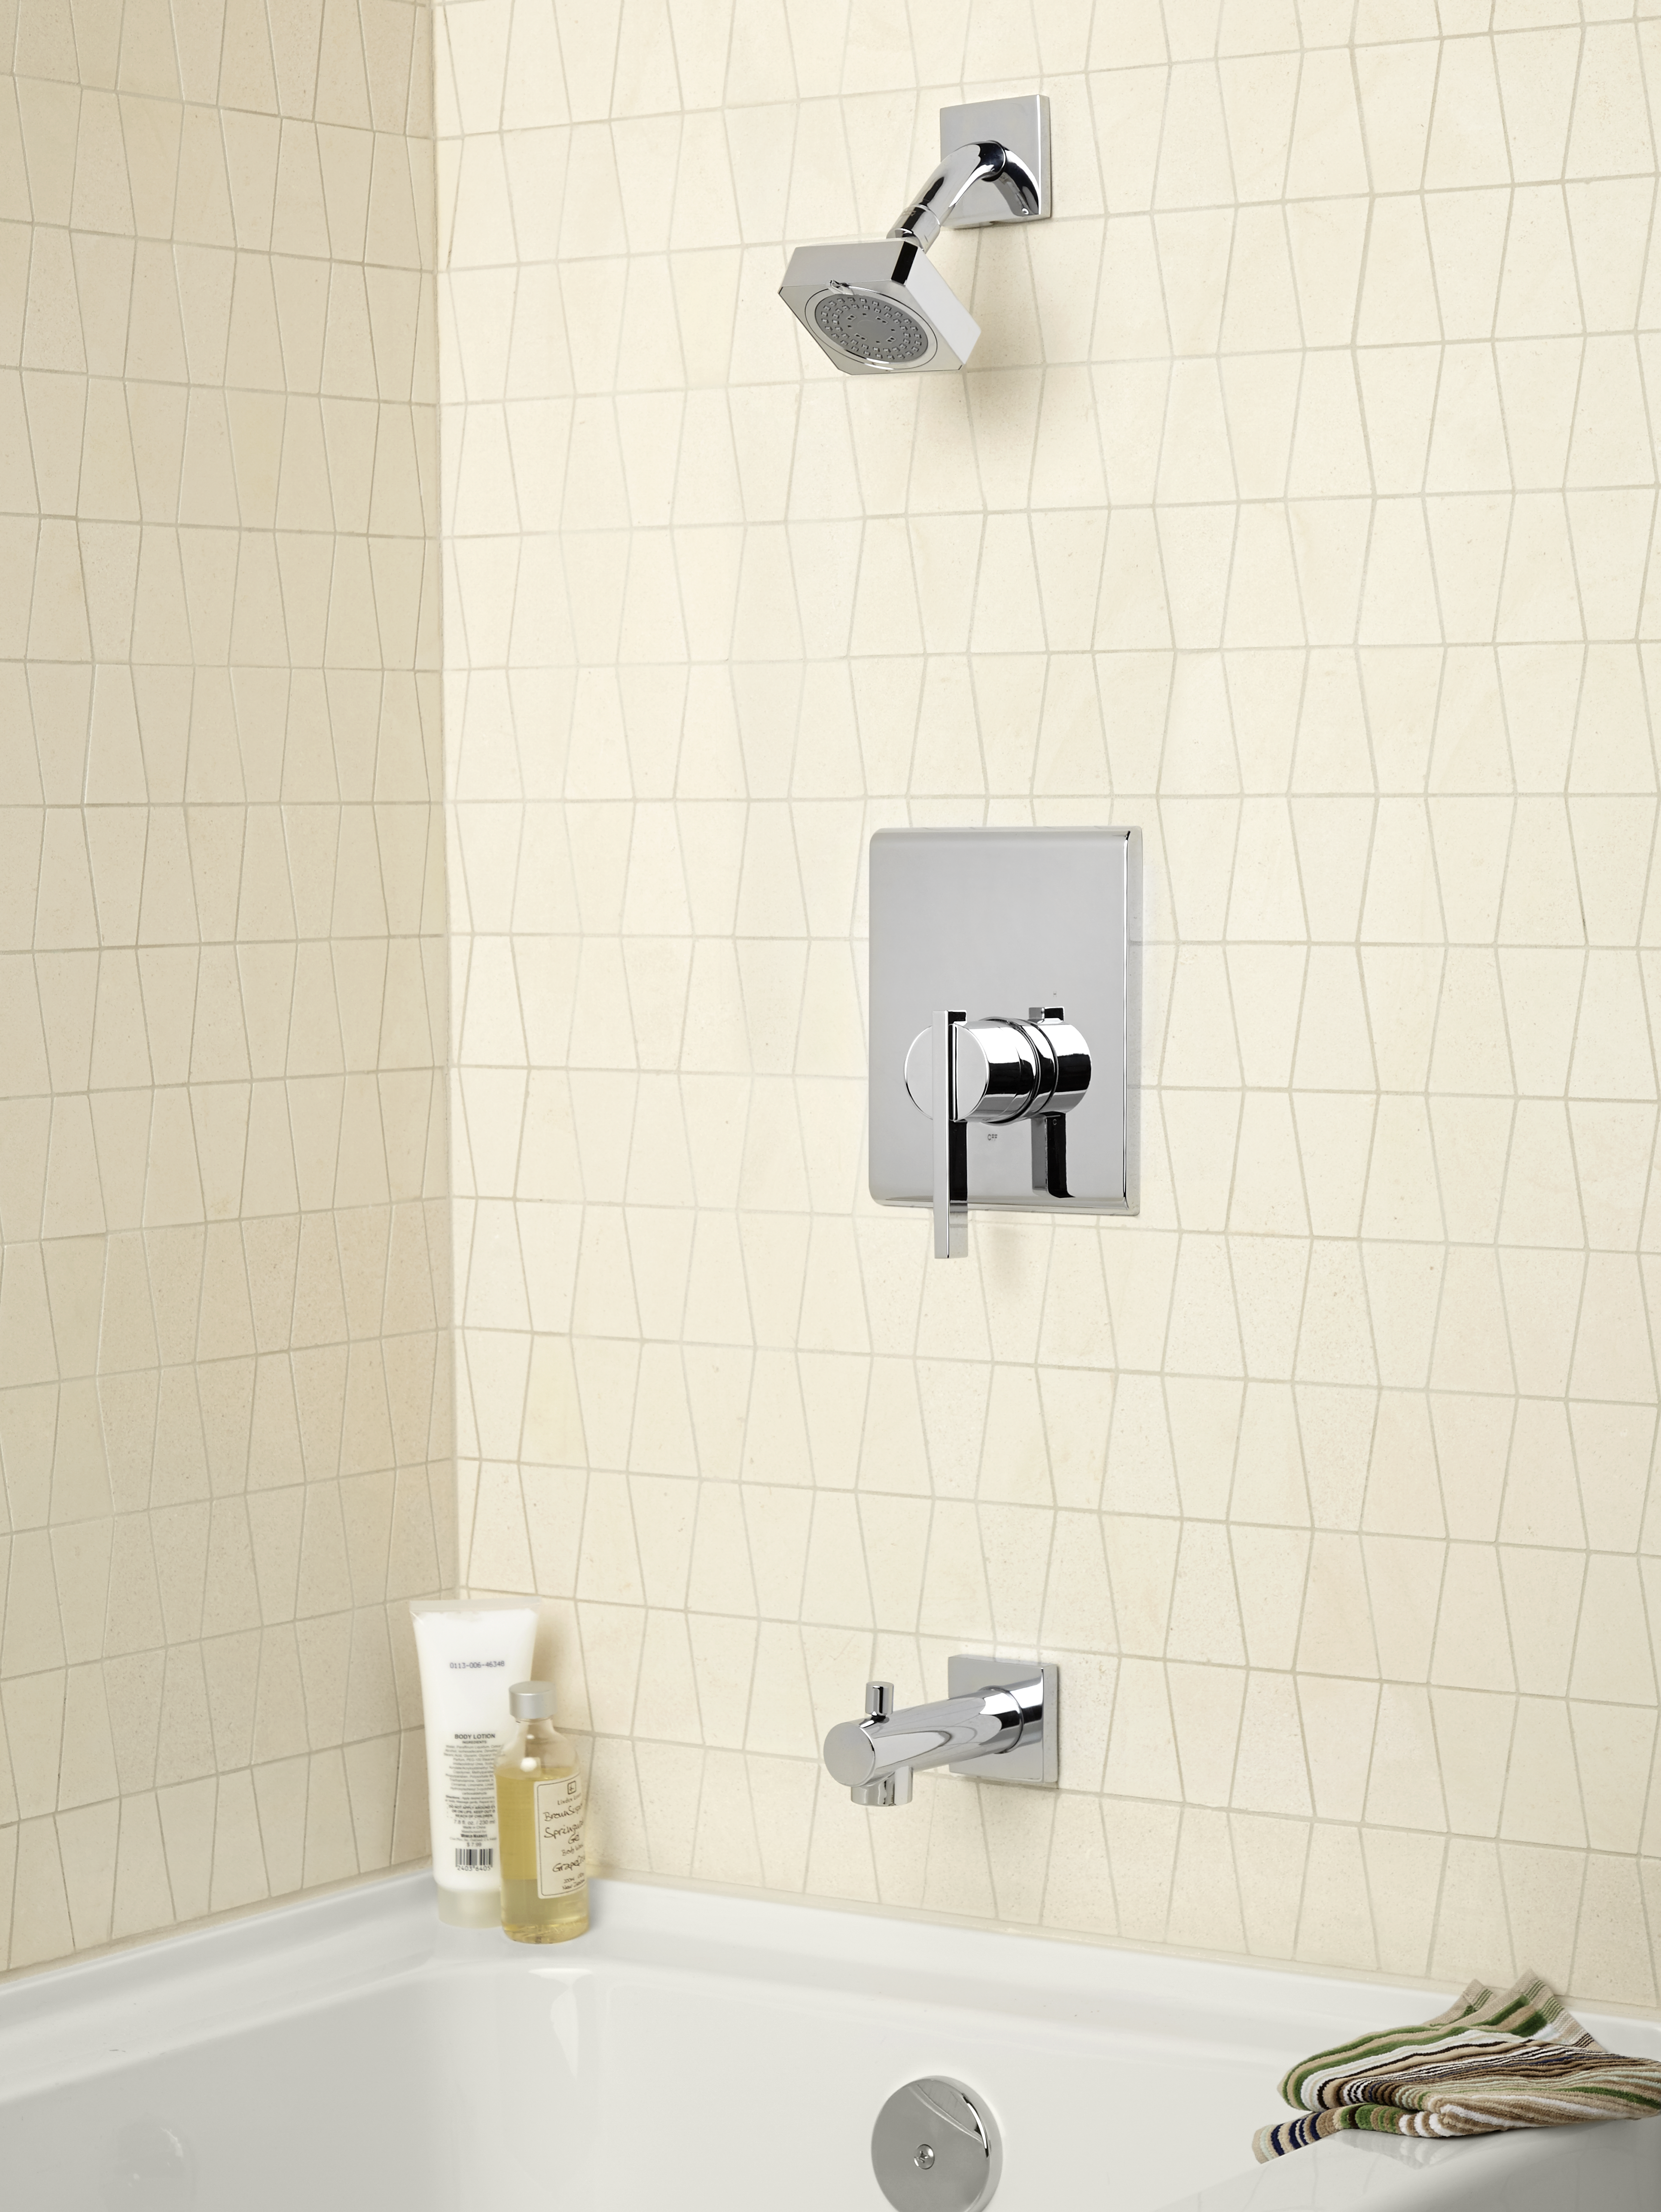 Times Square 2.0 GPM Tub and Shower Trim Kit with FloWise Showerhead and Lever Handle